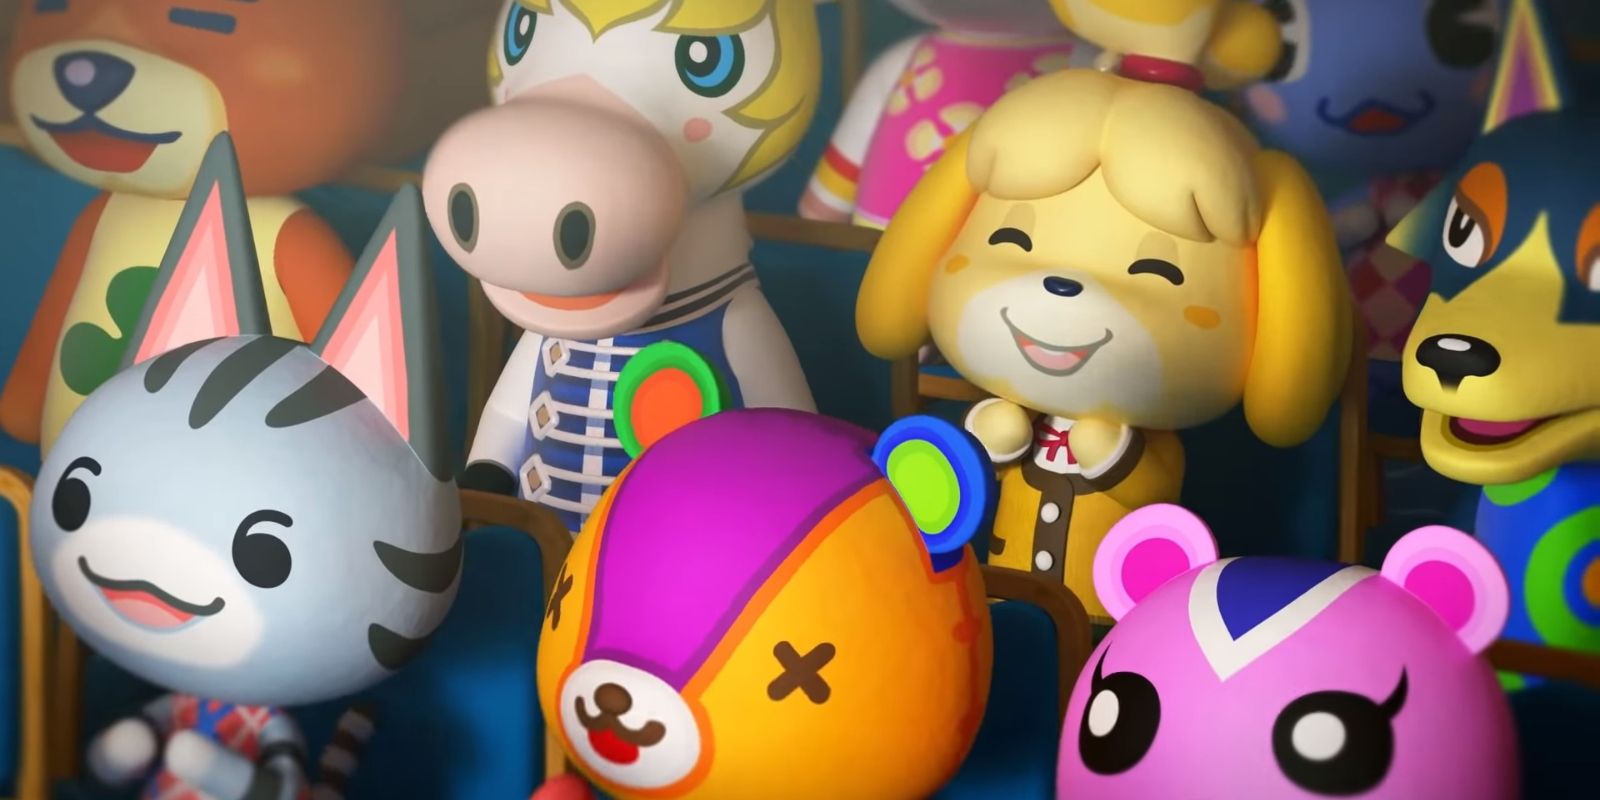 Animal Crossing: A New Villager Has a Wholesome Origin Story